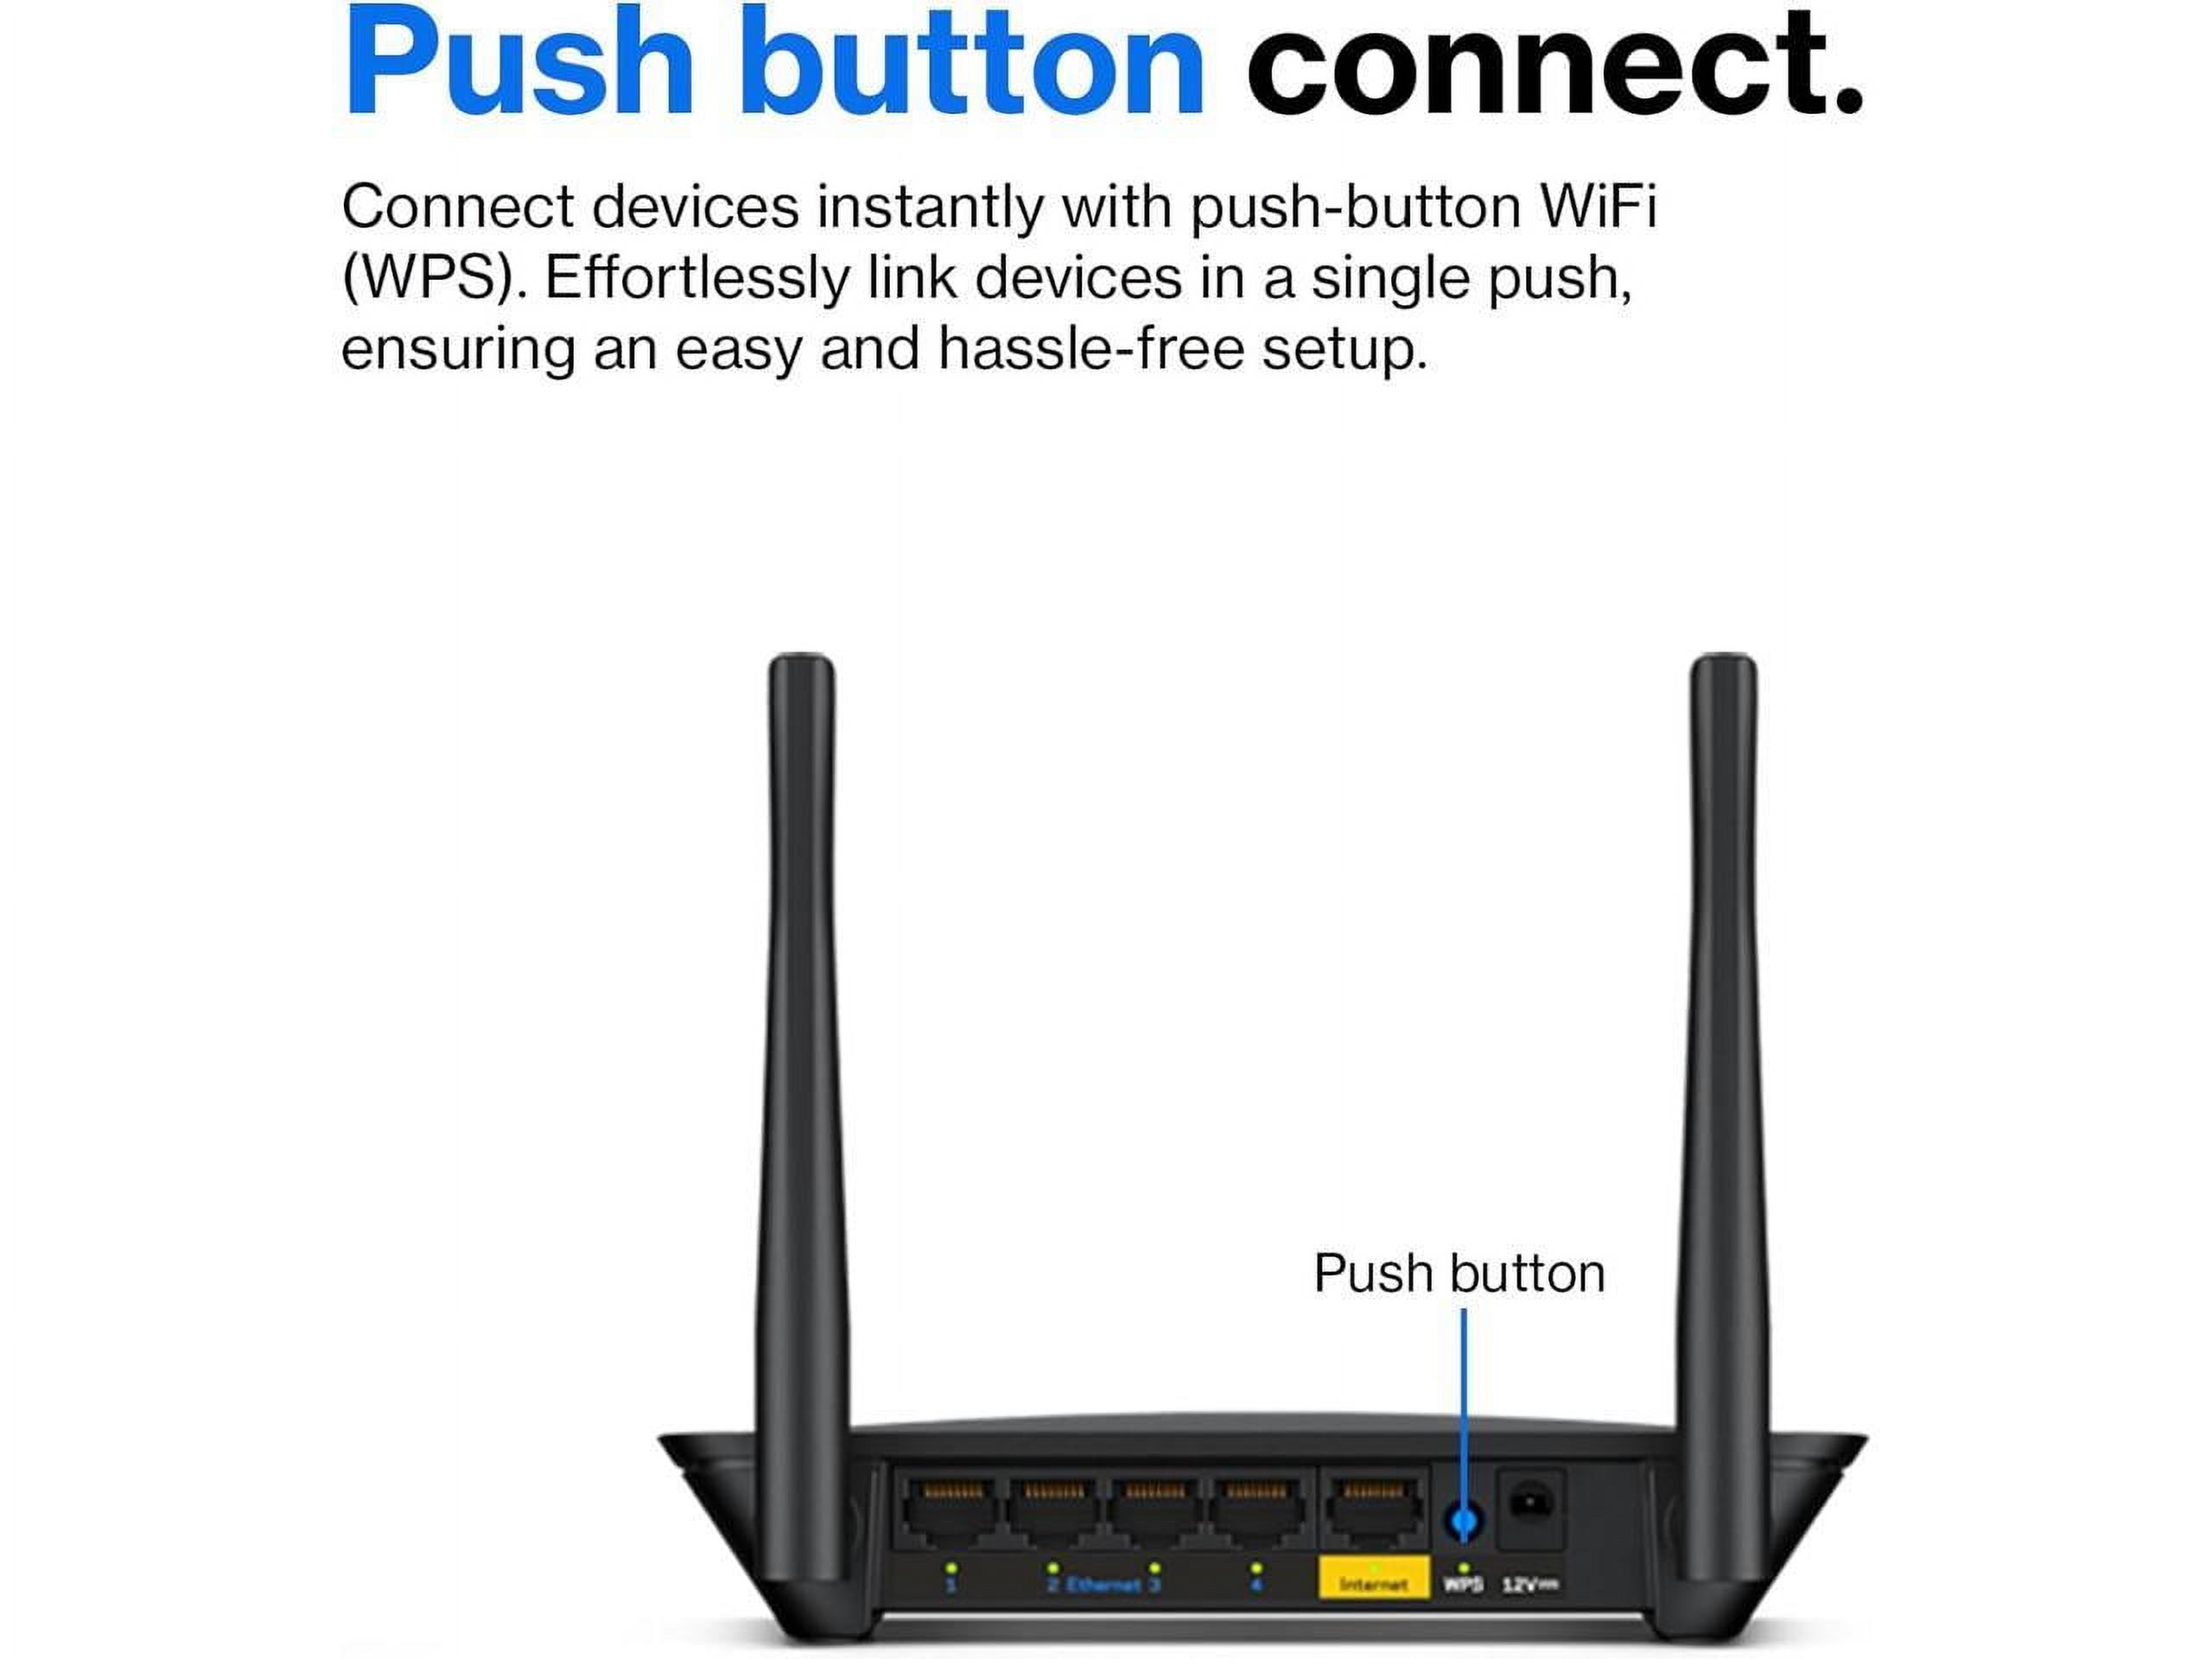 Linksys AC1200 Dual Band WiFi 5 Router with Easy Setup, Black - image 5 of 5